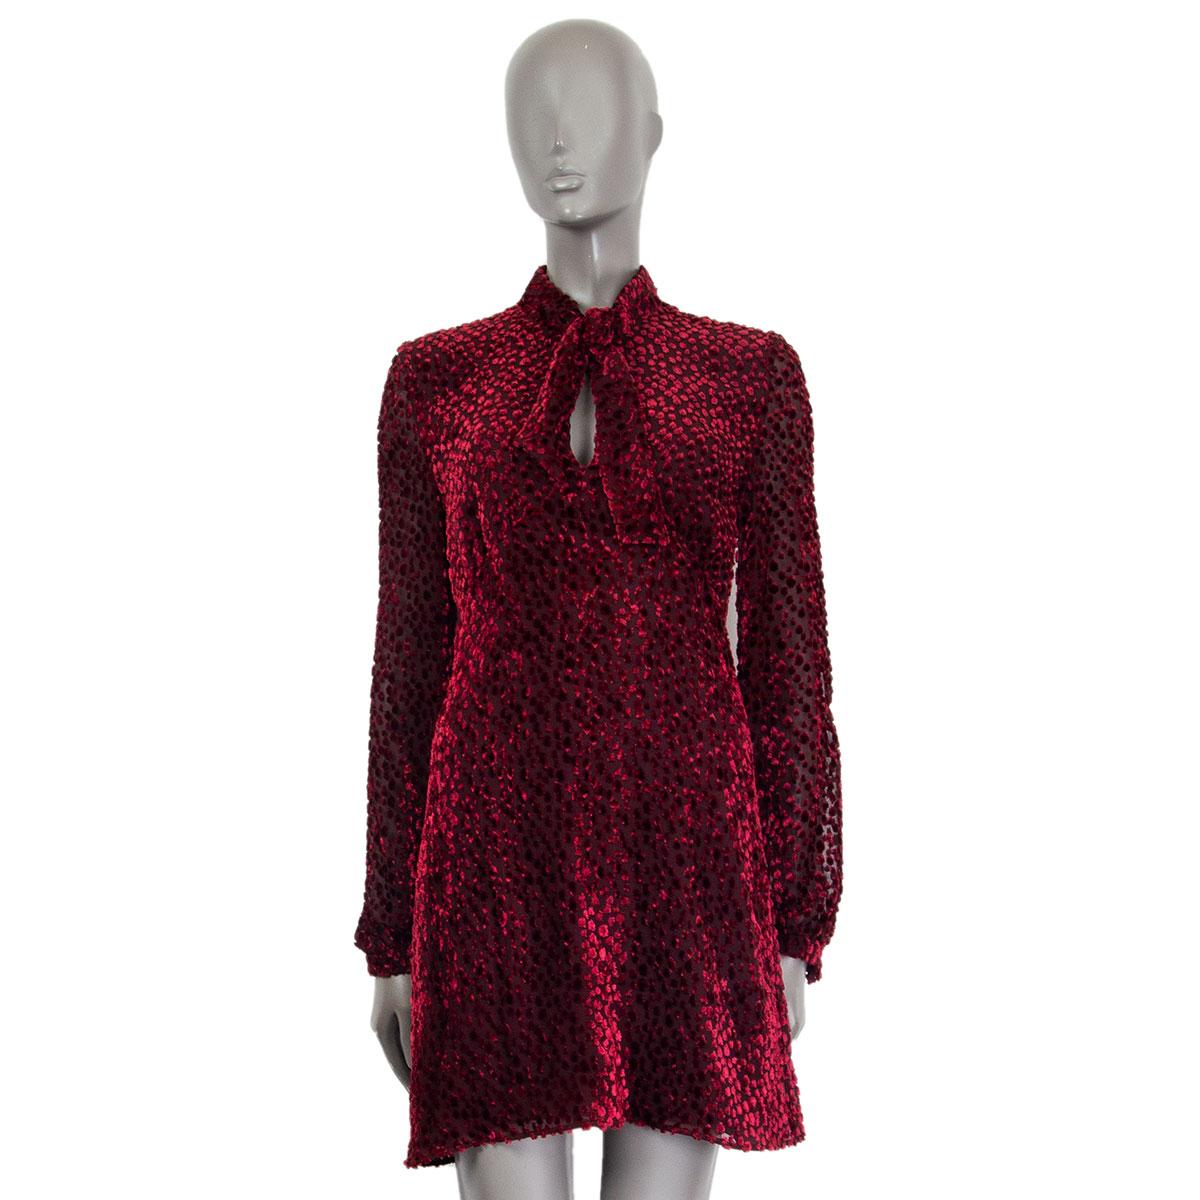 Saint Laurent pussy-bow devoré-chiffon mini dress in burgundy viscose (60%) and siilk (40%) with a lavallière-neck, long semi sheer sleeves and buttoned cuffs. Closes on the back with a concealed zipper. Lined in silk (100%). Has been worn and is in